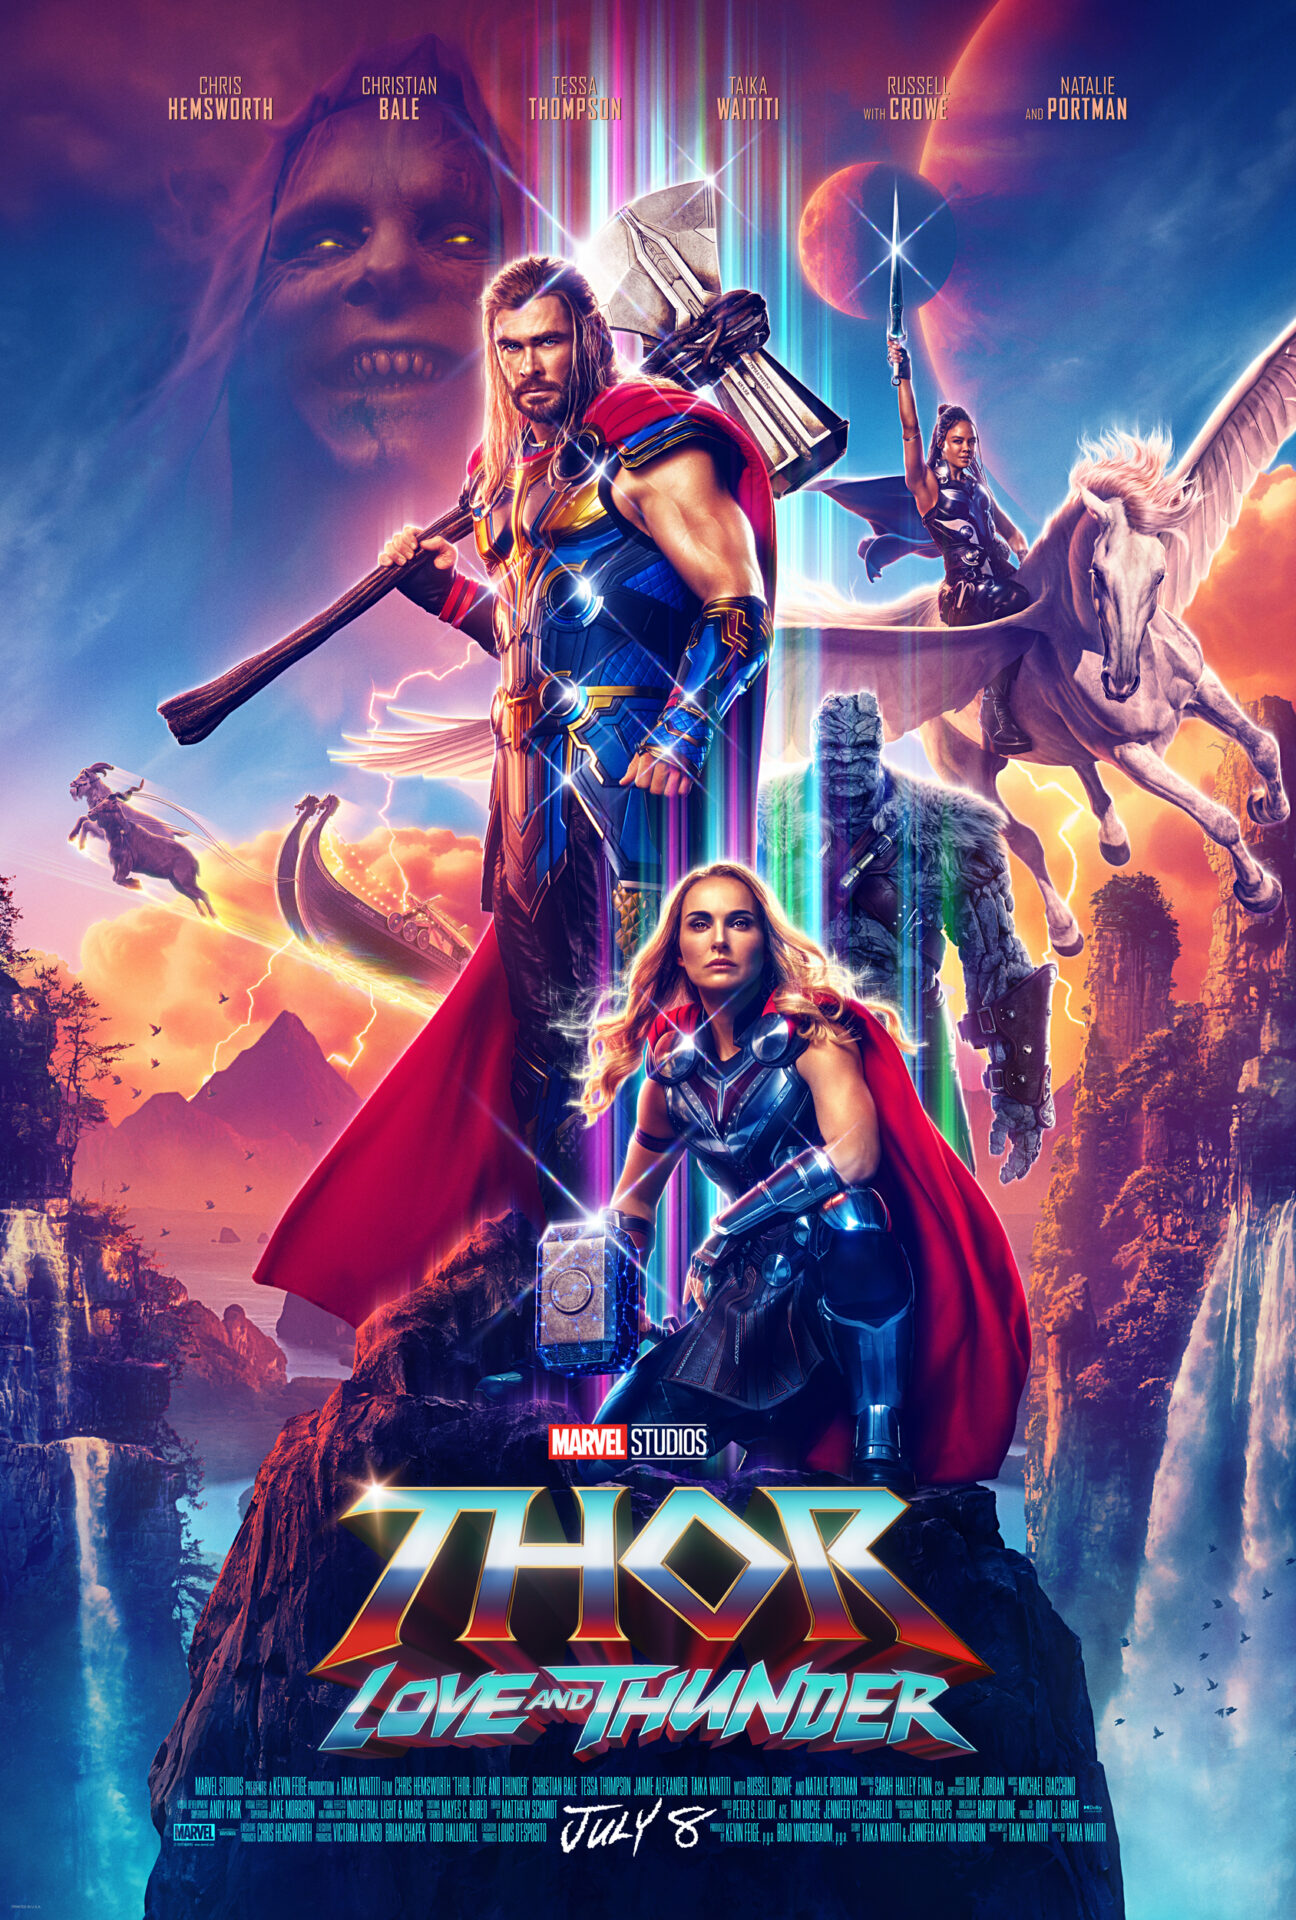 THOR: LOVE AND THUNDER - Movieguide | Movie Reviews for Christians